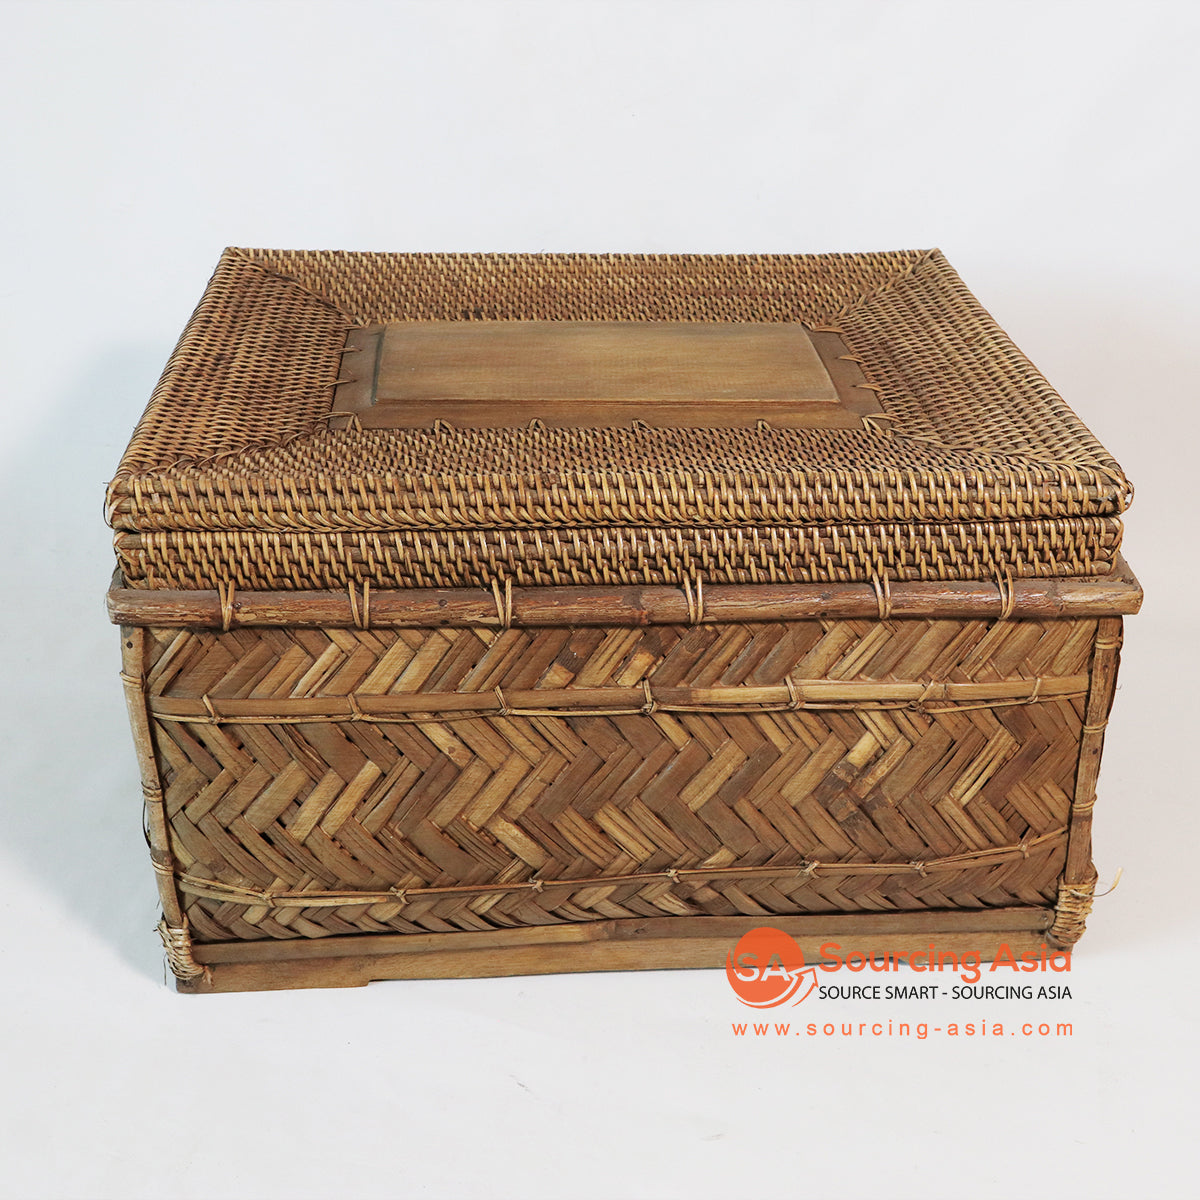 MTIC069 NATURAL WOVEN BAMBOO SQUARE BASKET WITH RATTAN LID